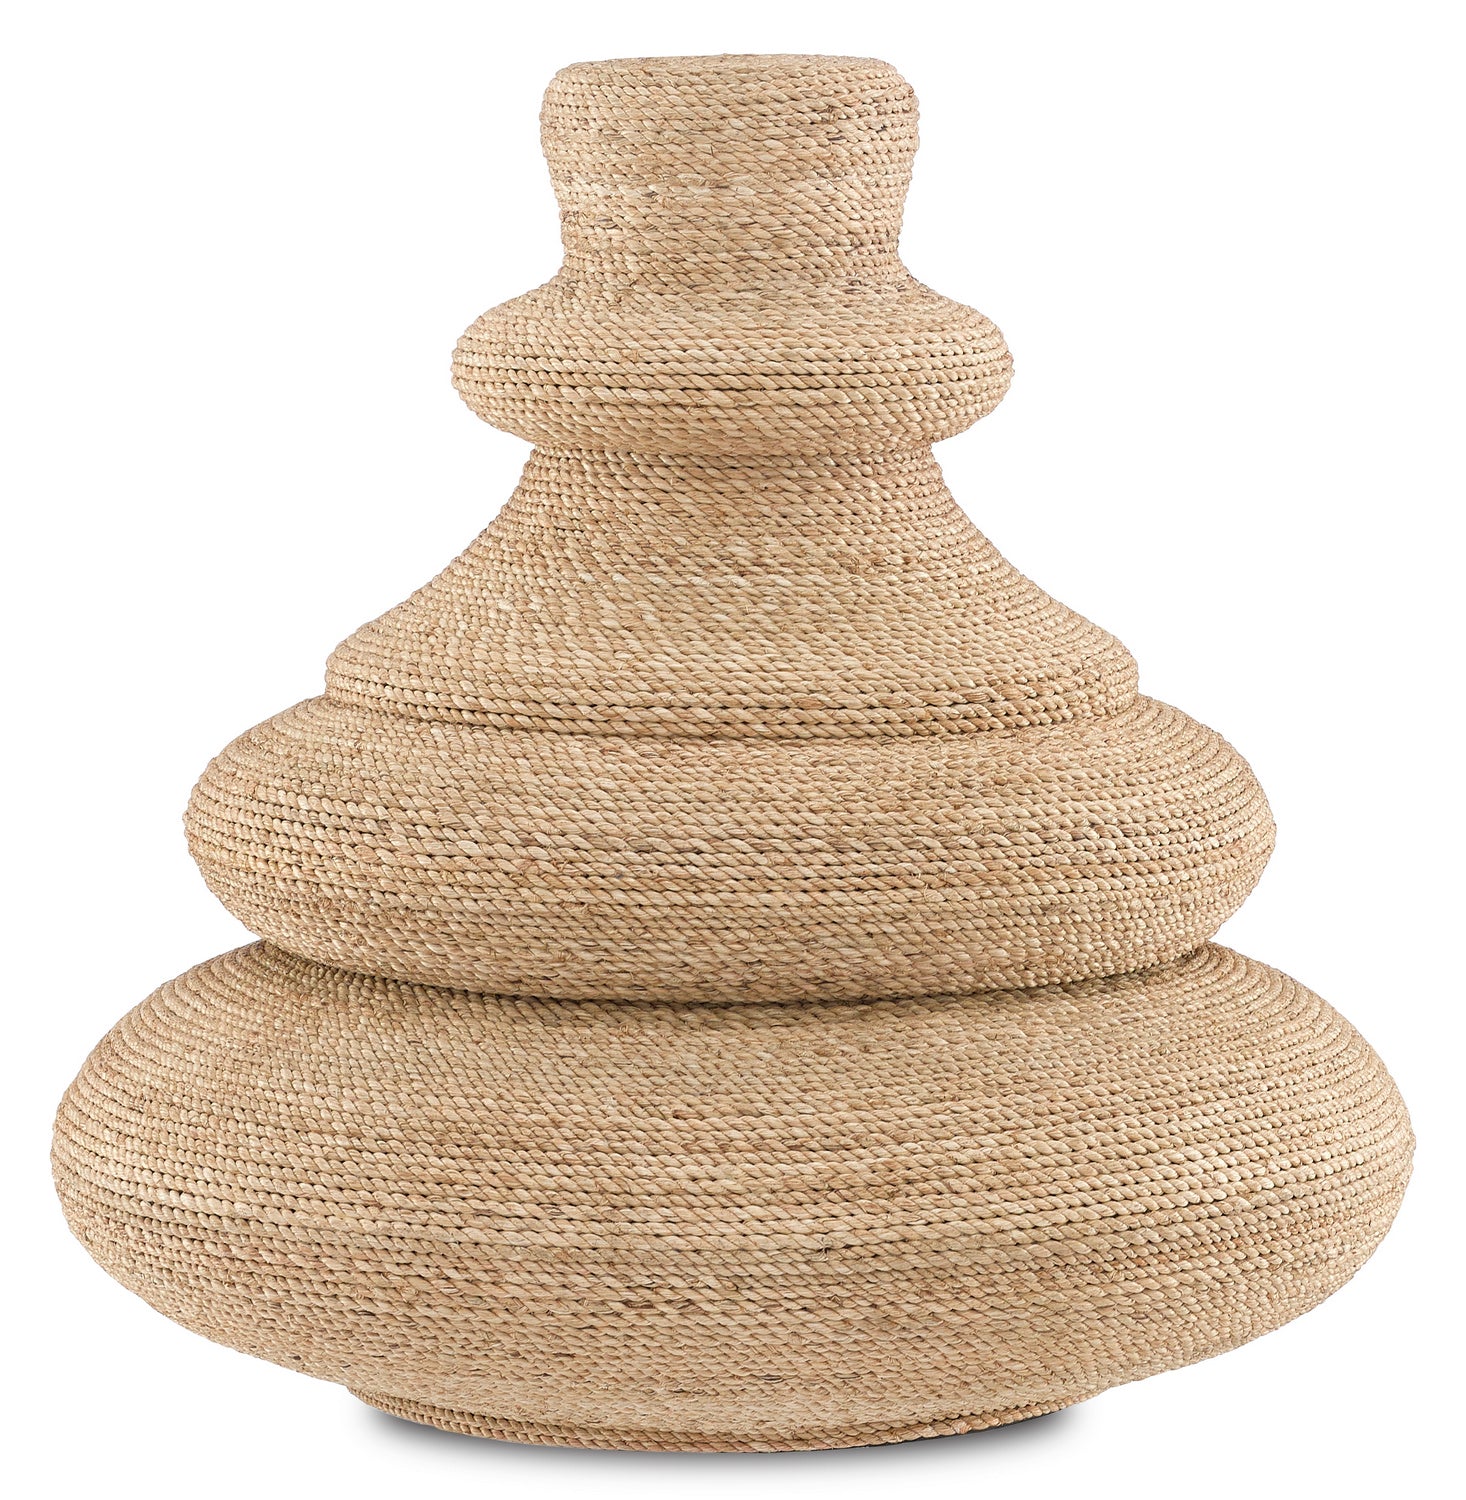 Vessel from the Jaru collection in Natural finish